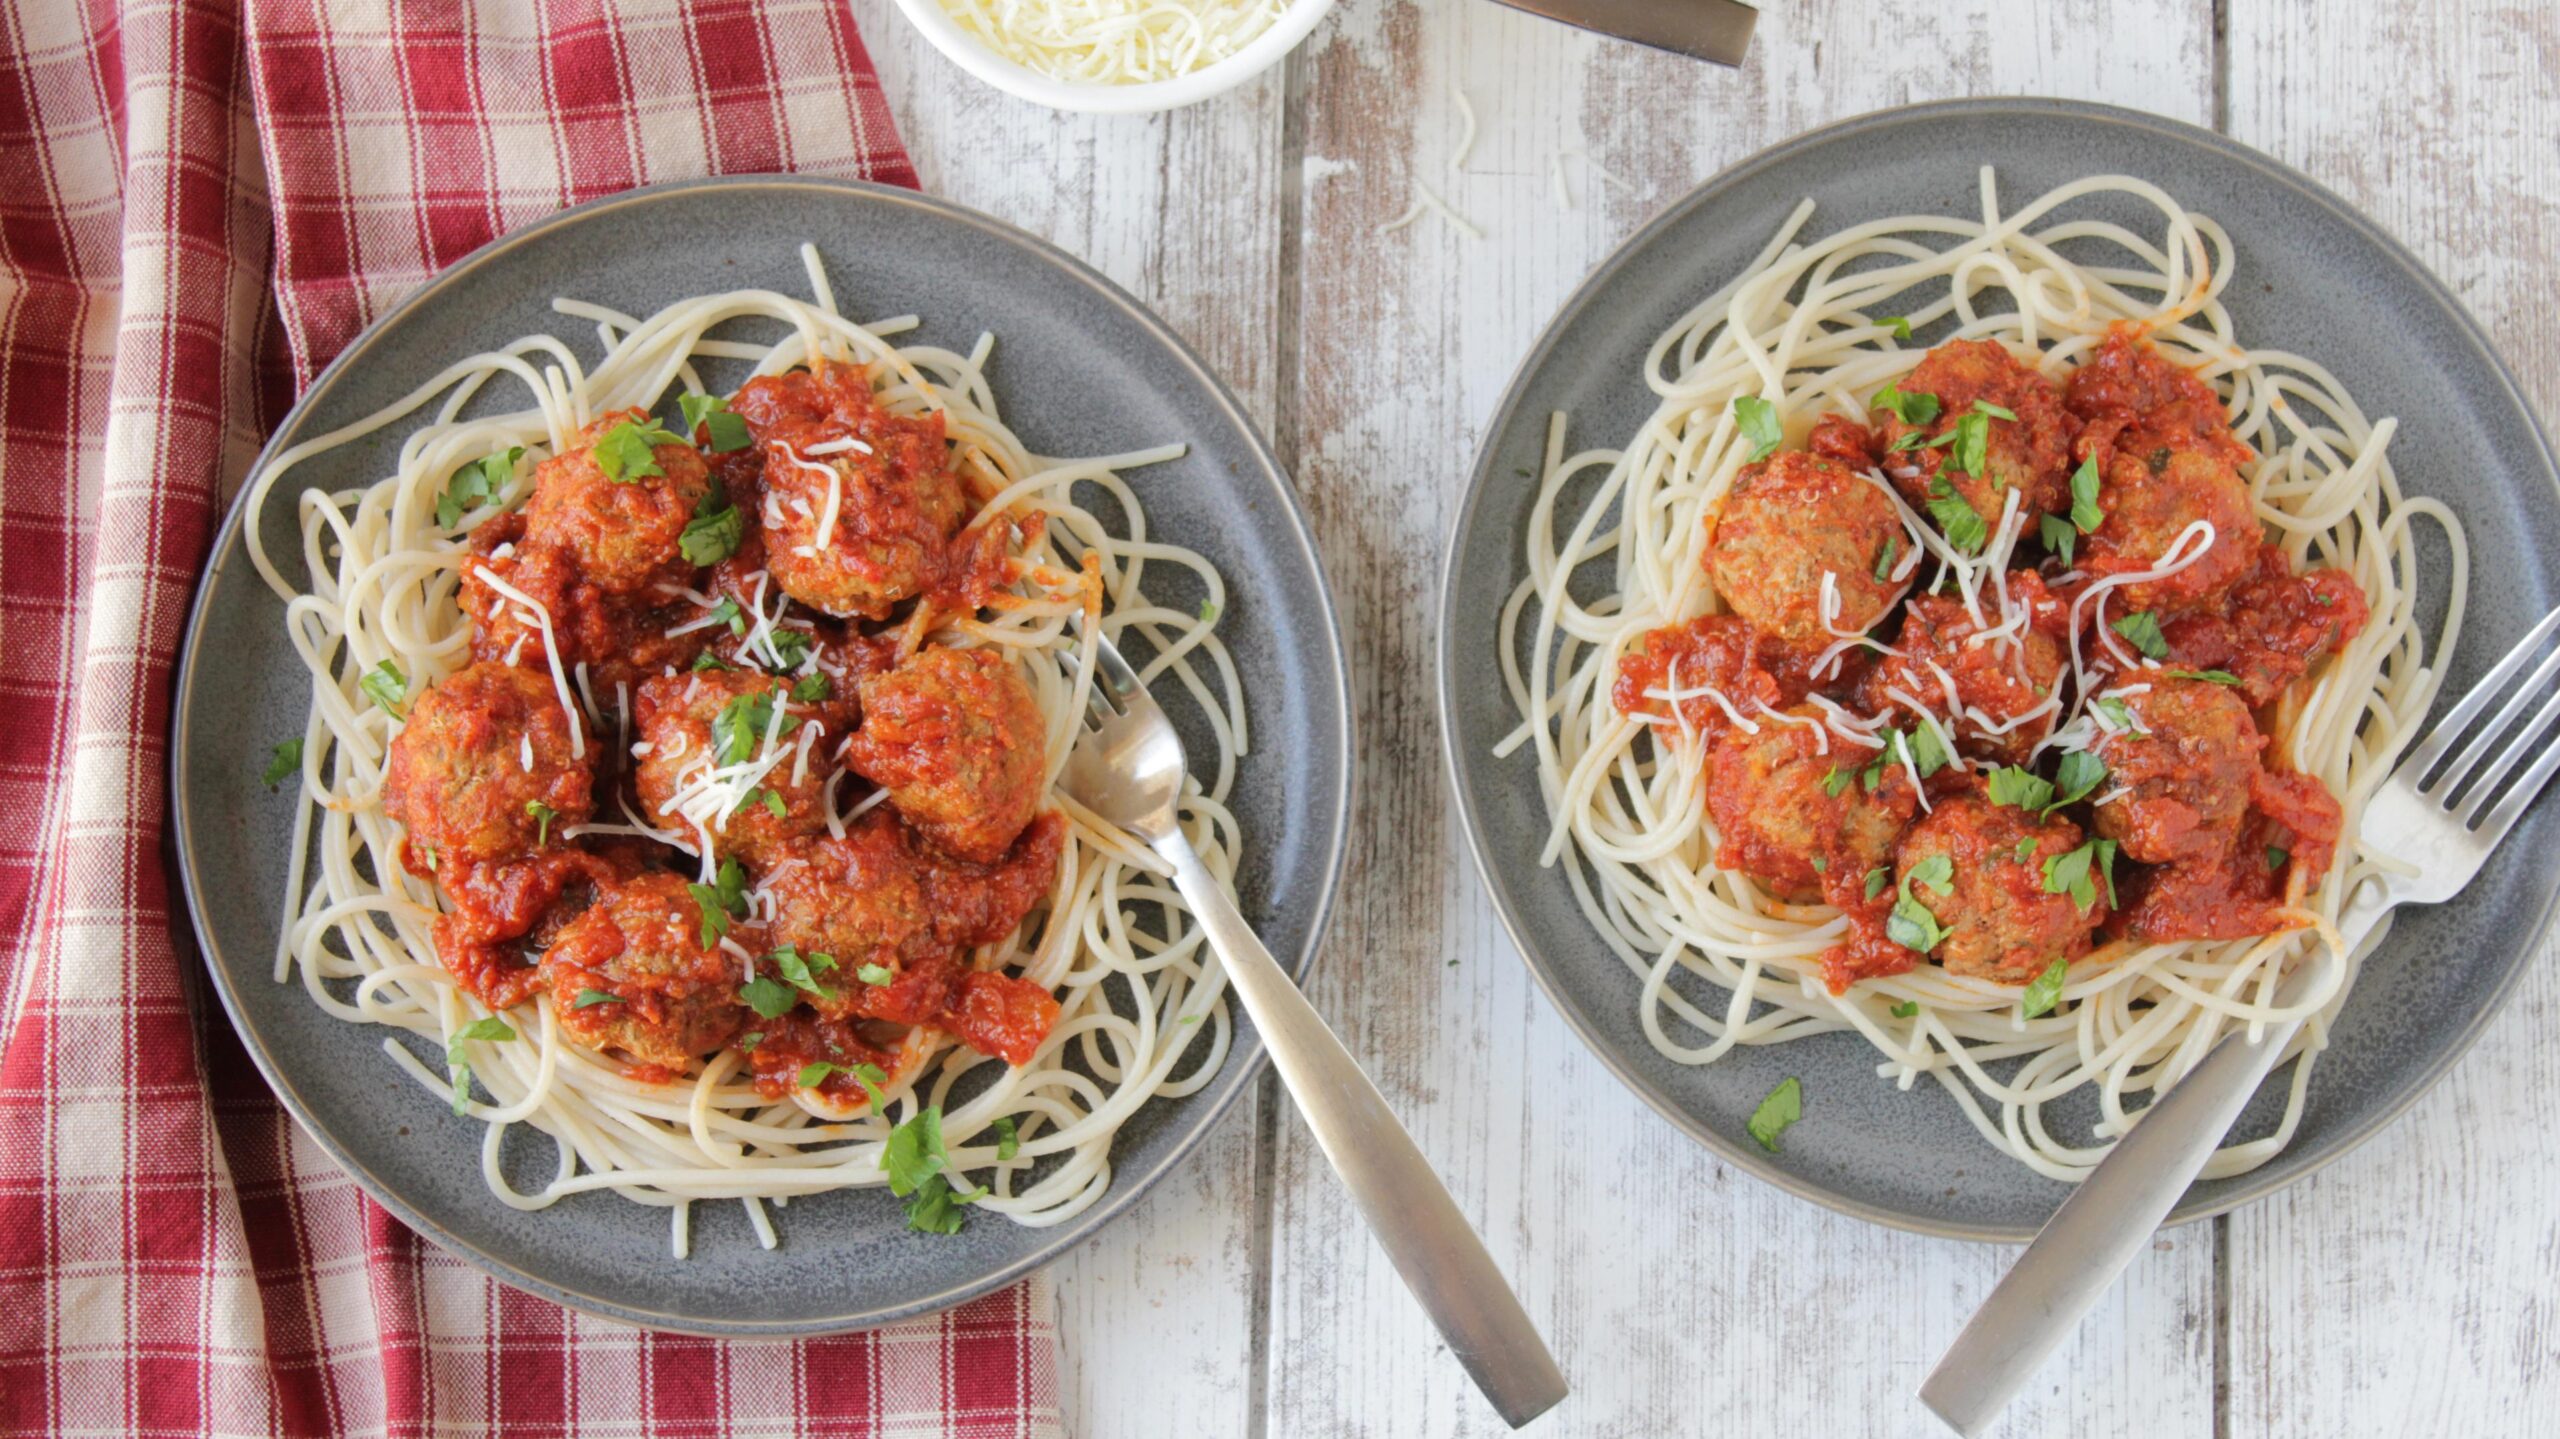  The perfect pairing - Instant Pot Italian Meatballs and a fresh green salad.